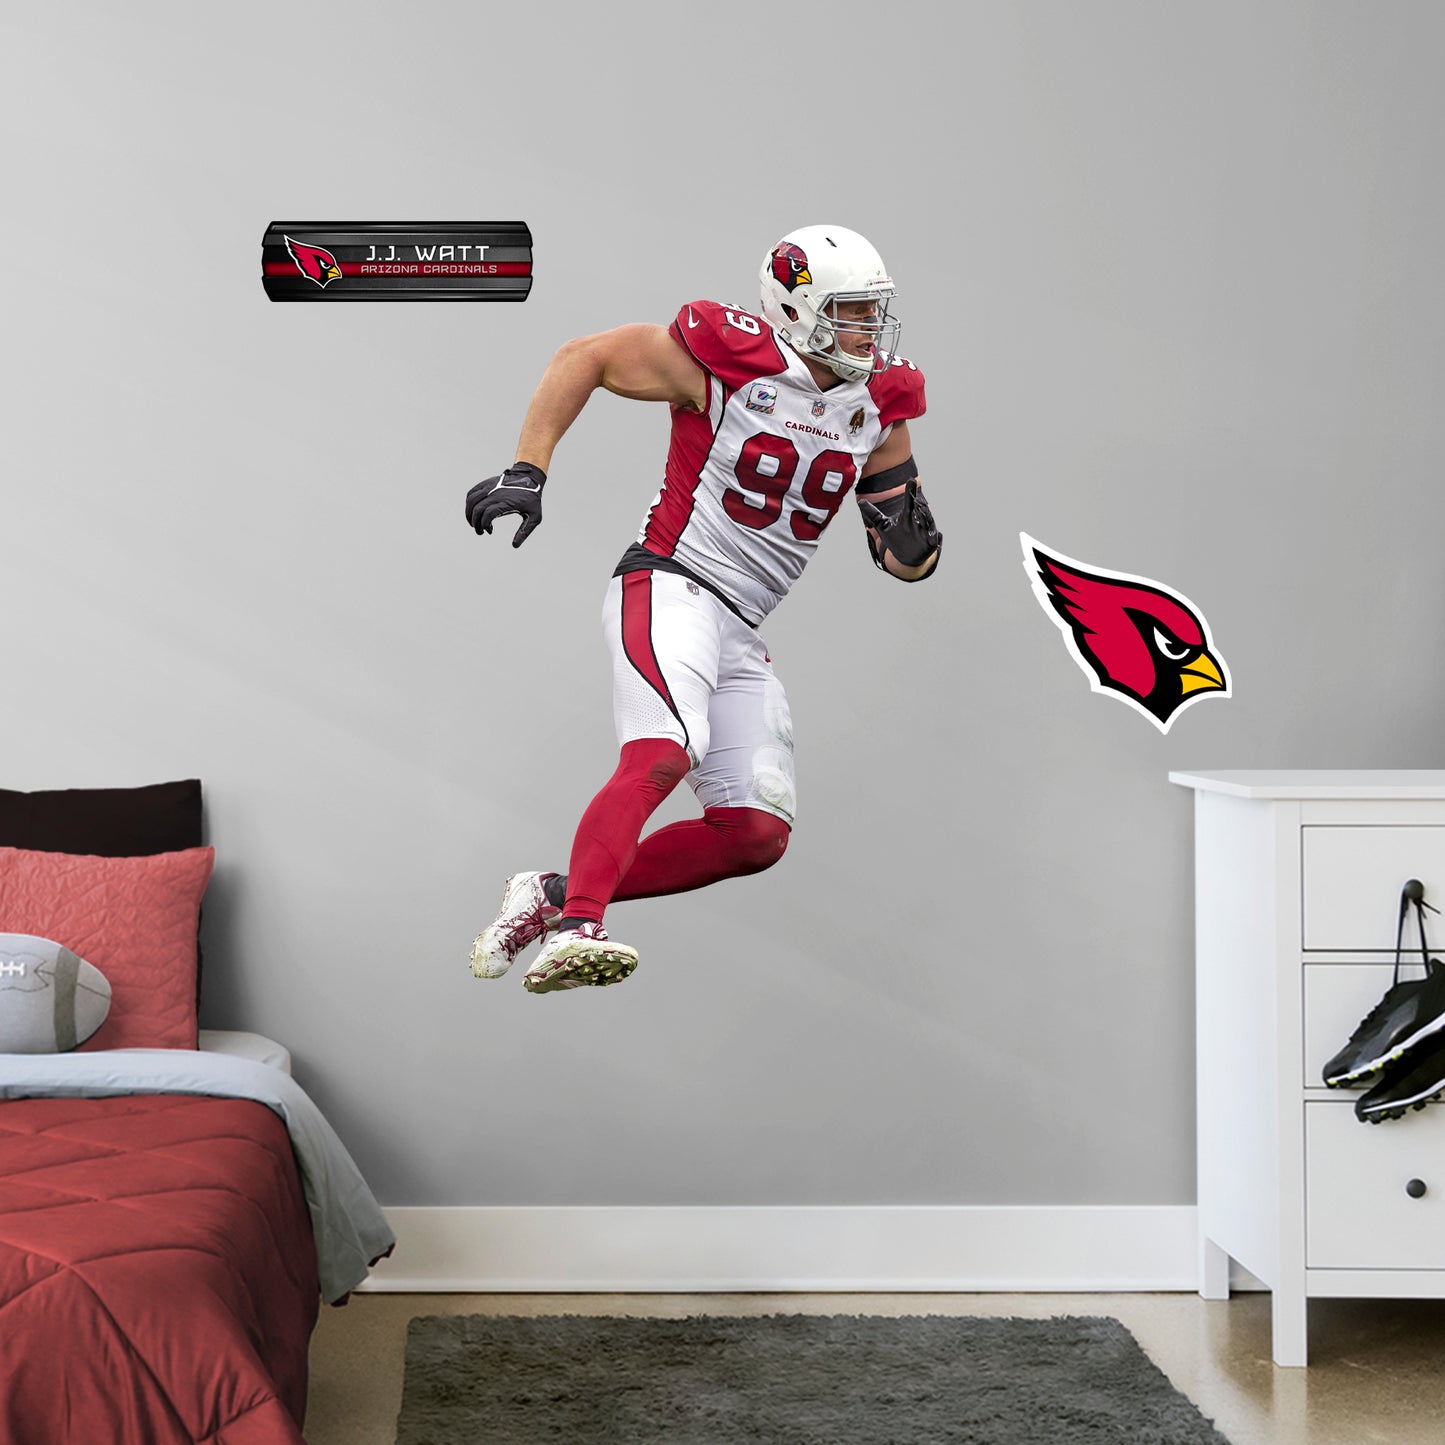 Arizona Cardinals: J.J. Watt - Officially Licensed NFL Removable Adhesive Decal